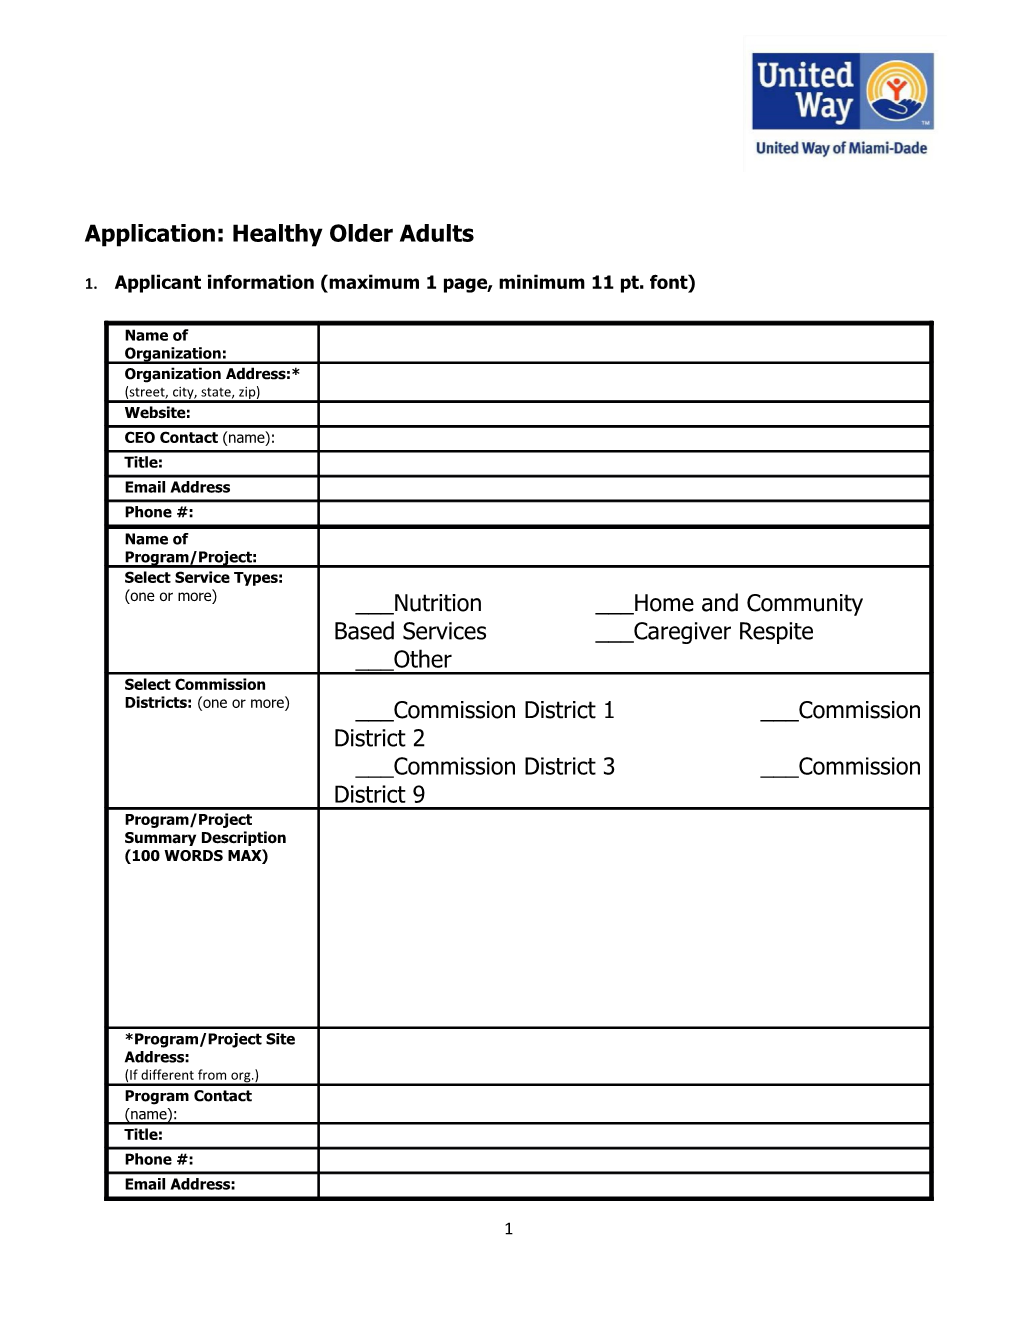 Application: Healthy Older Adults